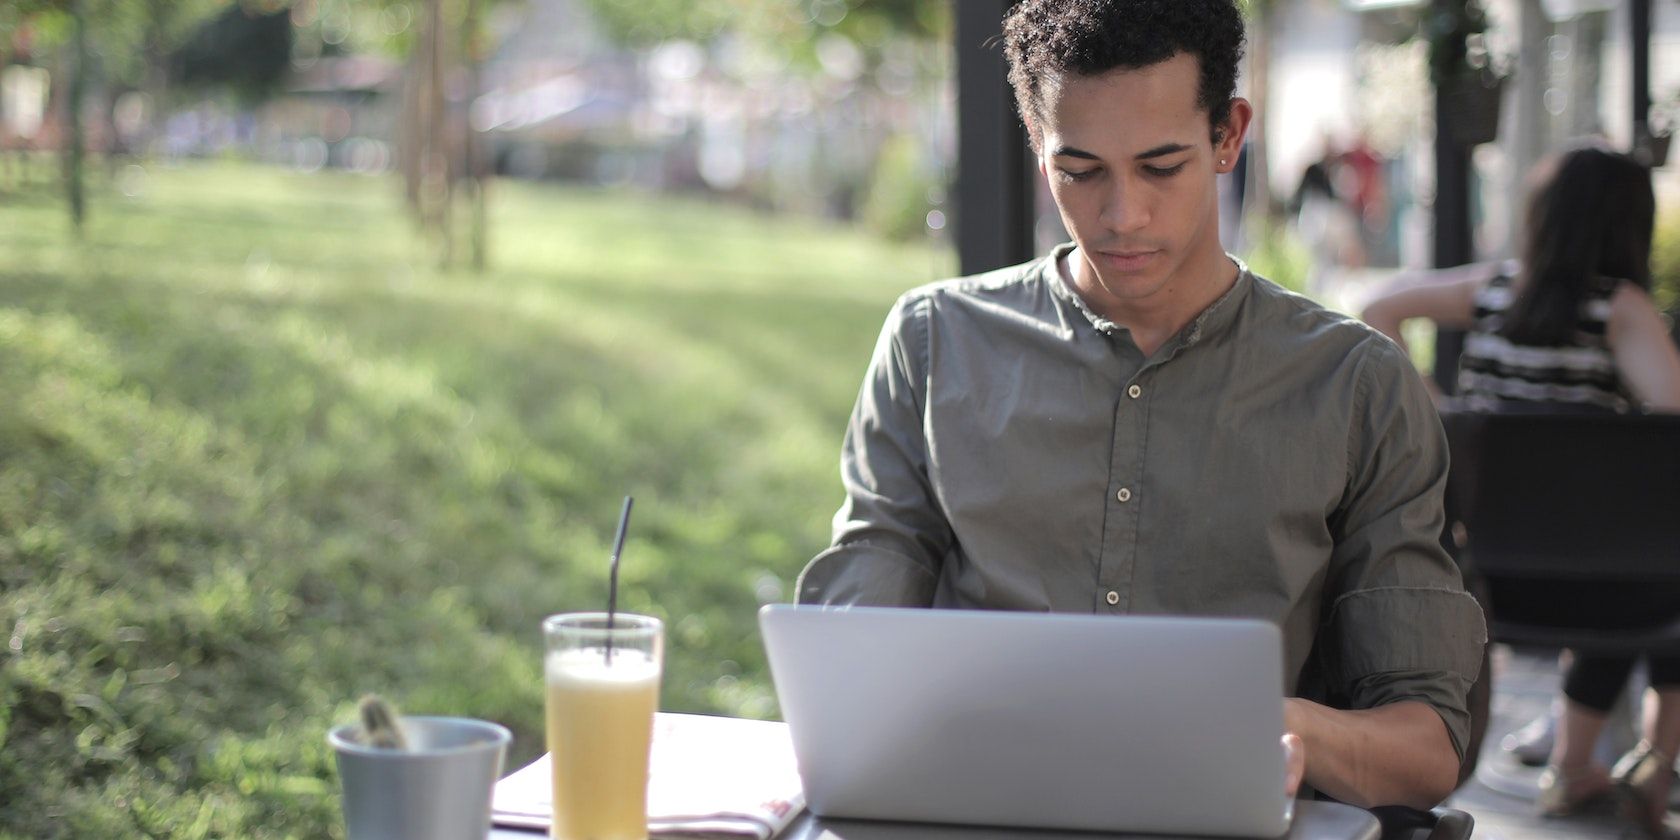 Man sitting at a street cafe focused on laptop screen